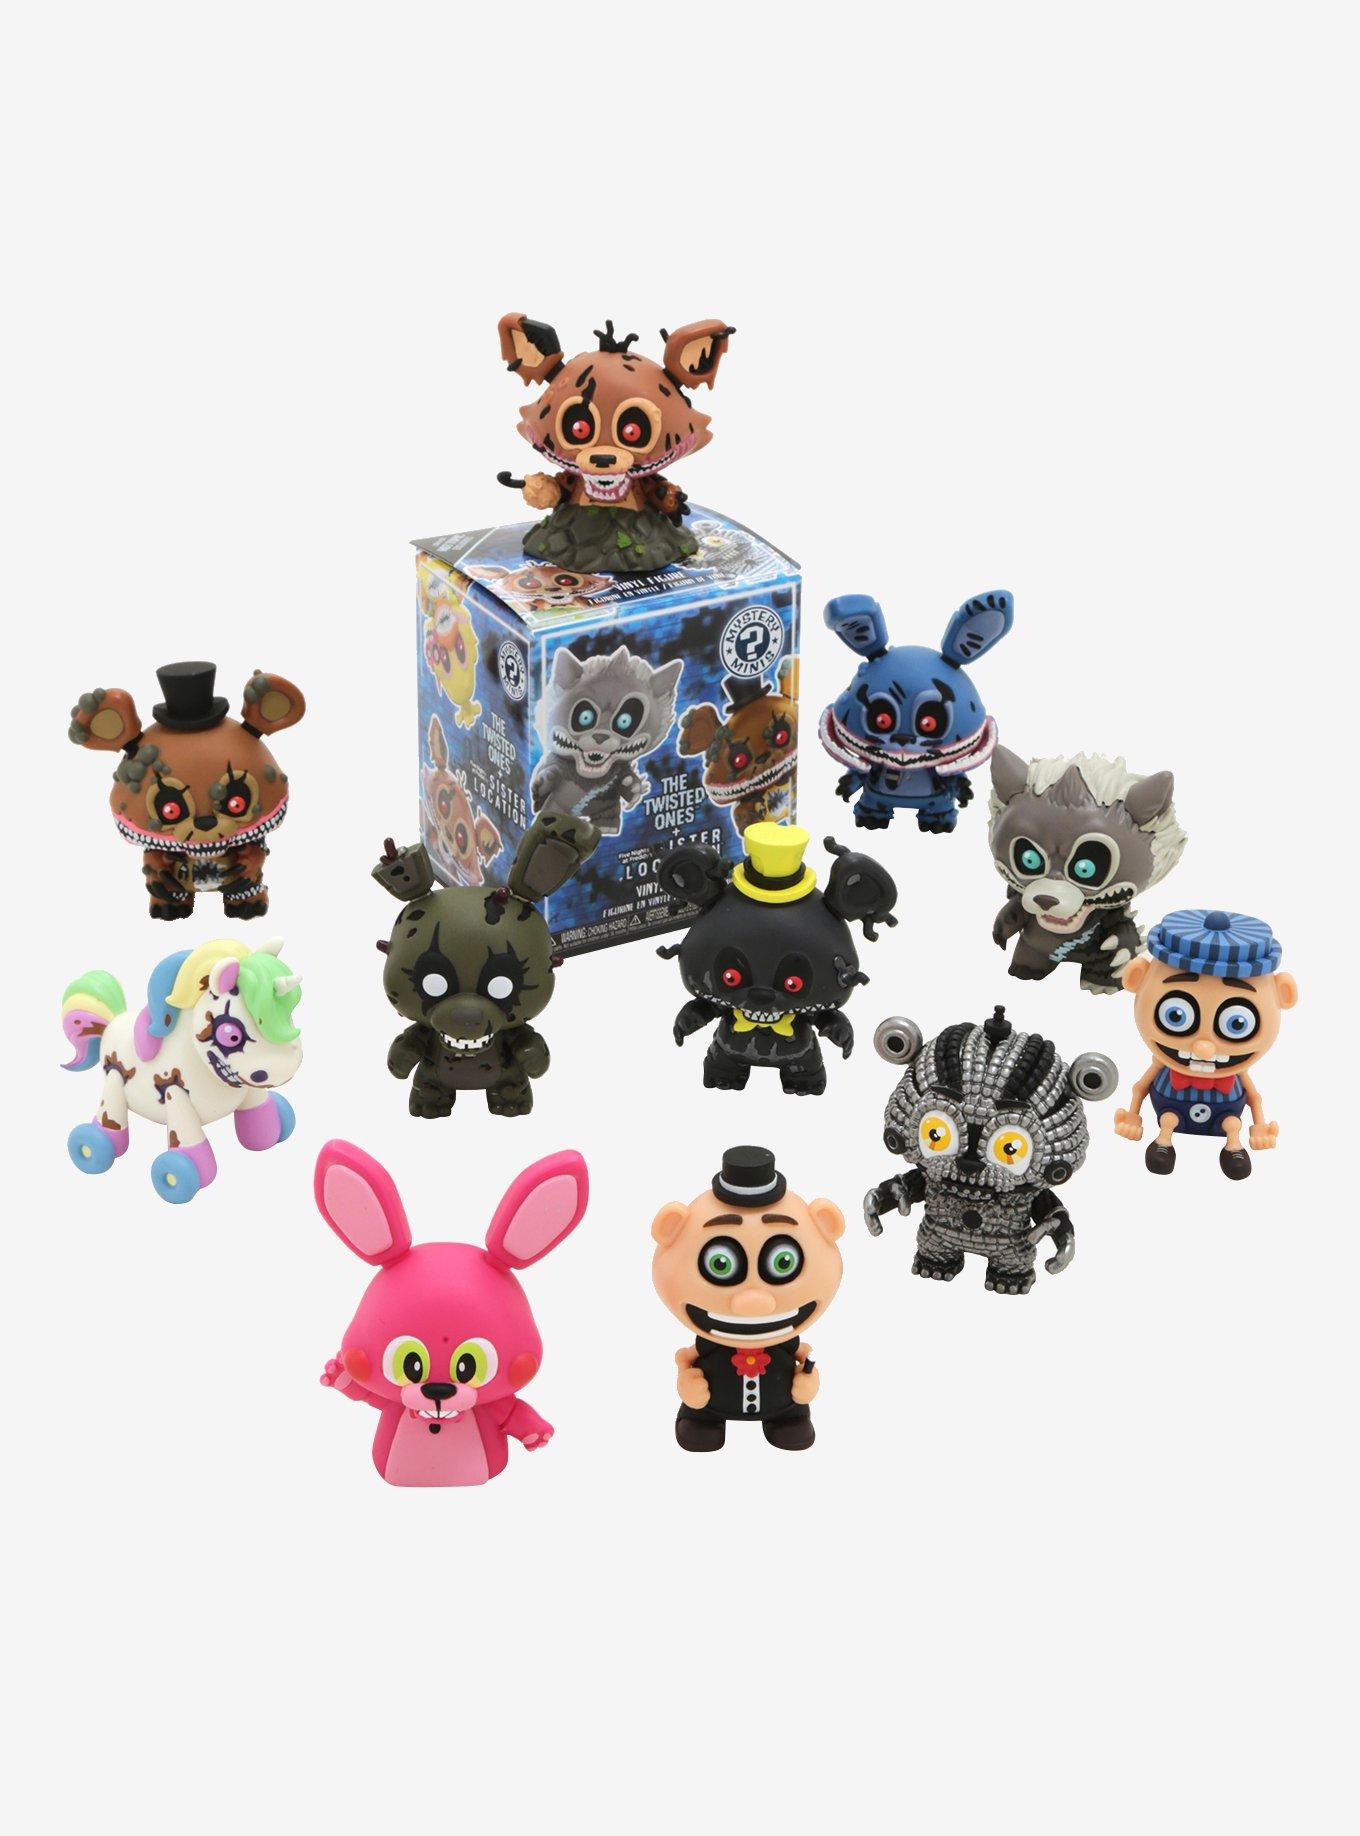 Funko Mystery Minis Five Nights at Freddy's FNAF Series 1 Figure